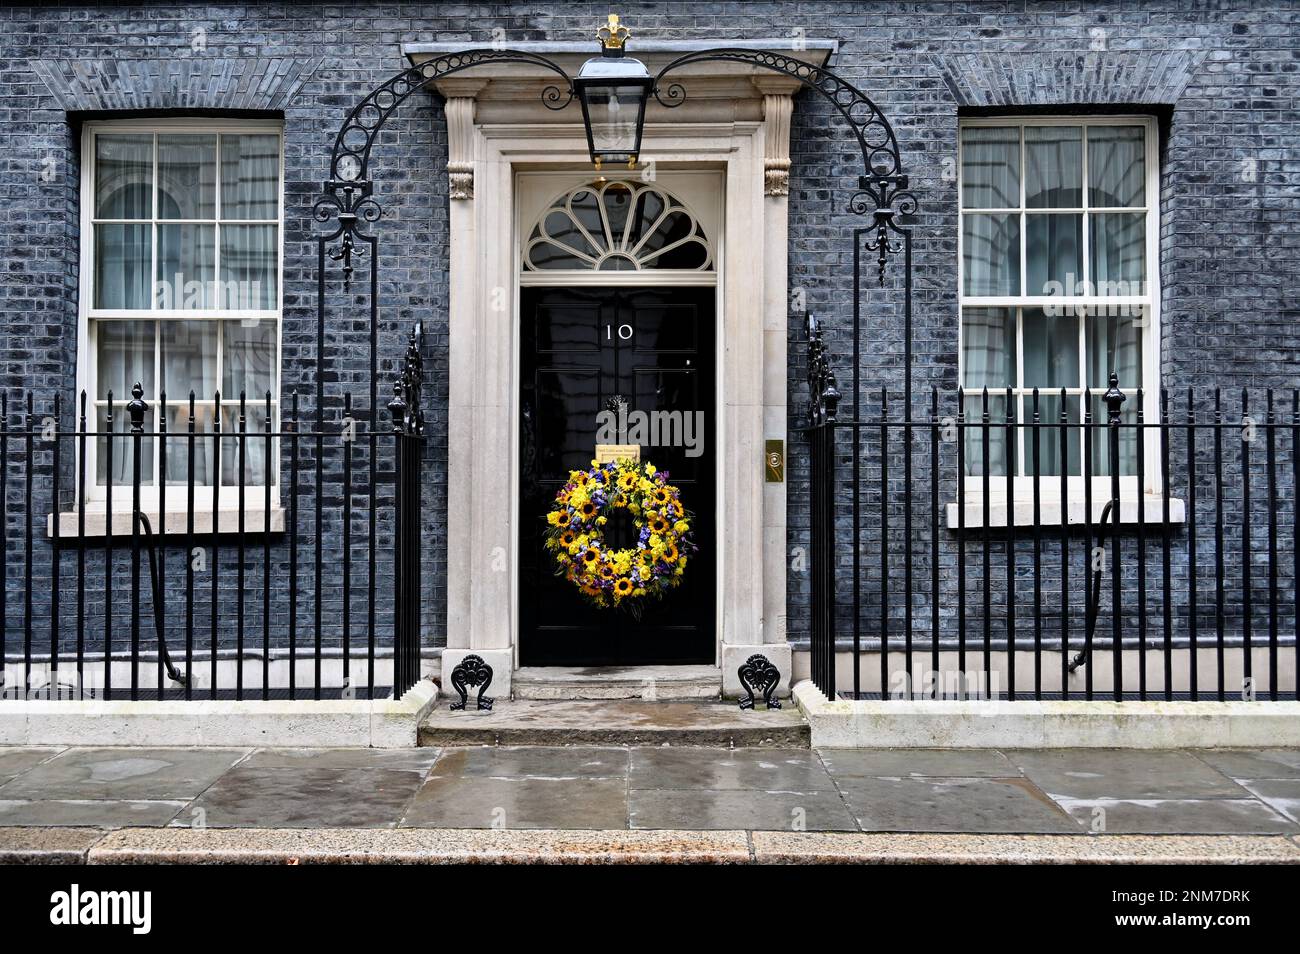 London, UK. The first anniversary of the invasion of Ukraine by Russia was marked with a wreath of Sunflowers hung on the front door of 10 Downing Street in Whitehall. Credit: michael melia/Alamy Live News Stock Photo